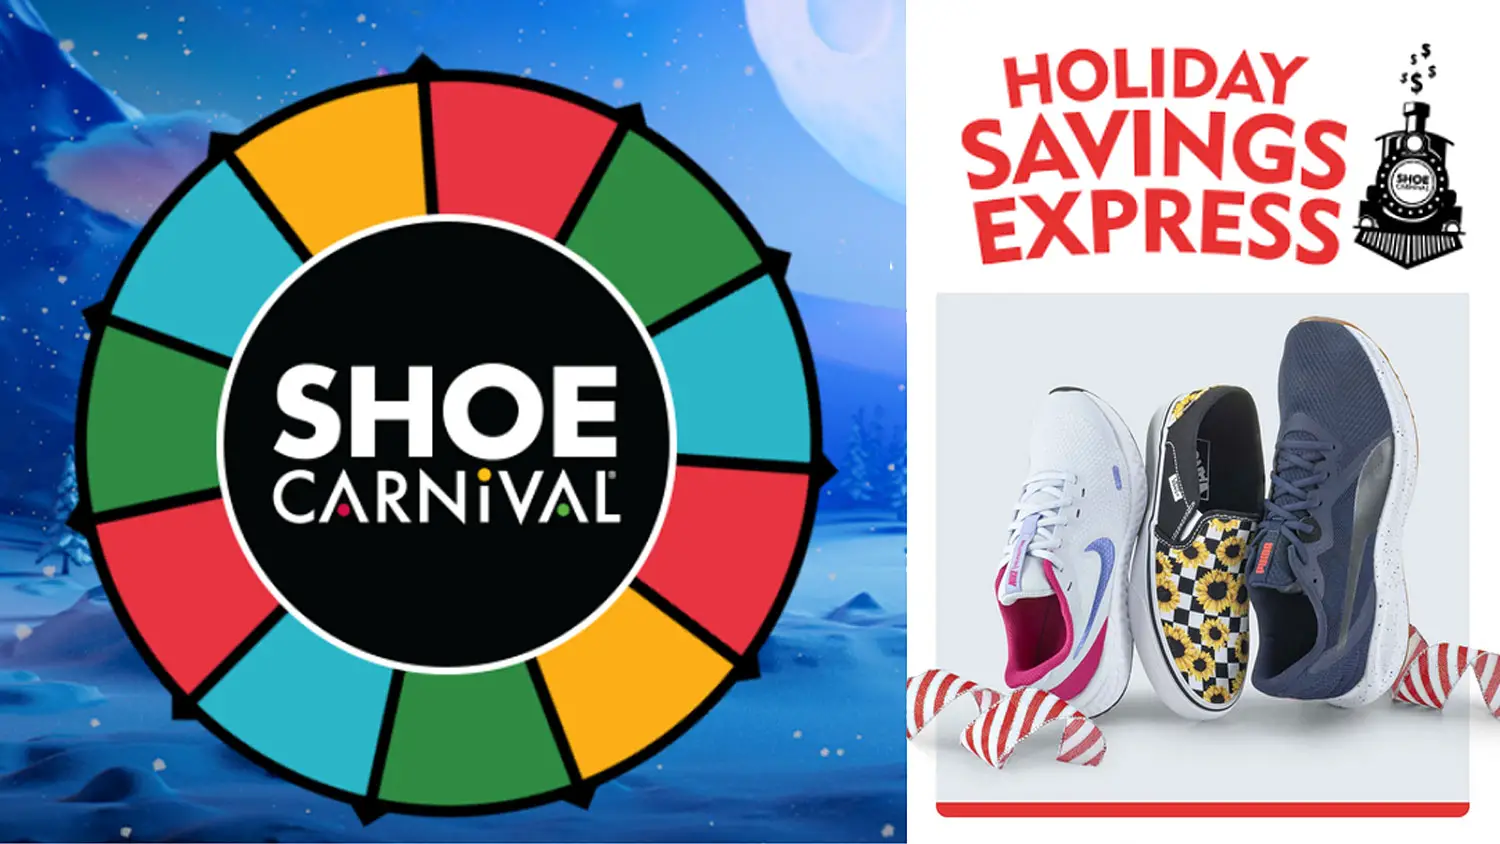 Play the Shoe Carnival shoebox game and once you are finished (it's just for fun) you will be prompted to spin the wheel to find out if you won a prize. If you don't win a prize you will win a discount coupon for use on shoecarnival.com